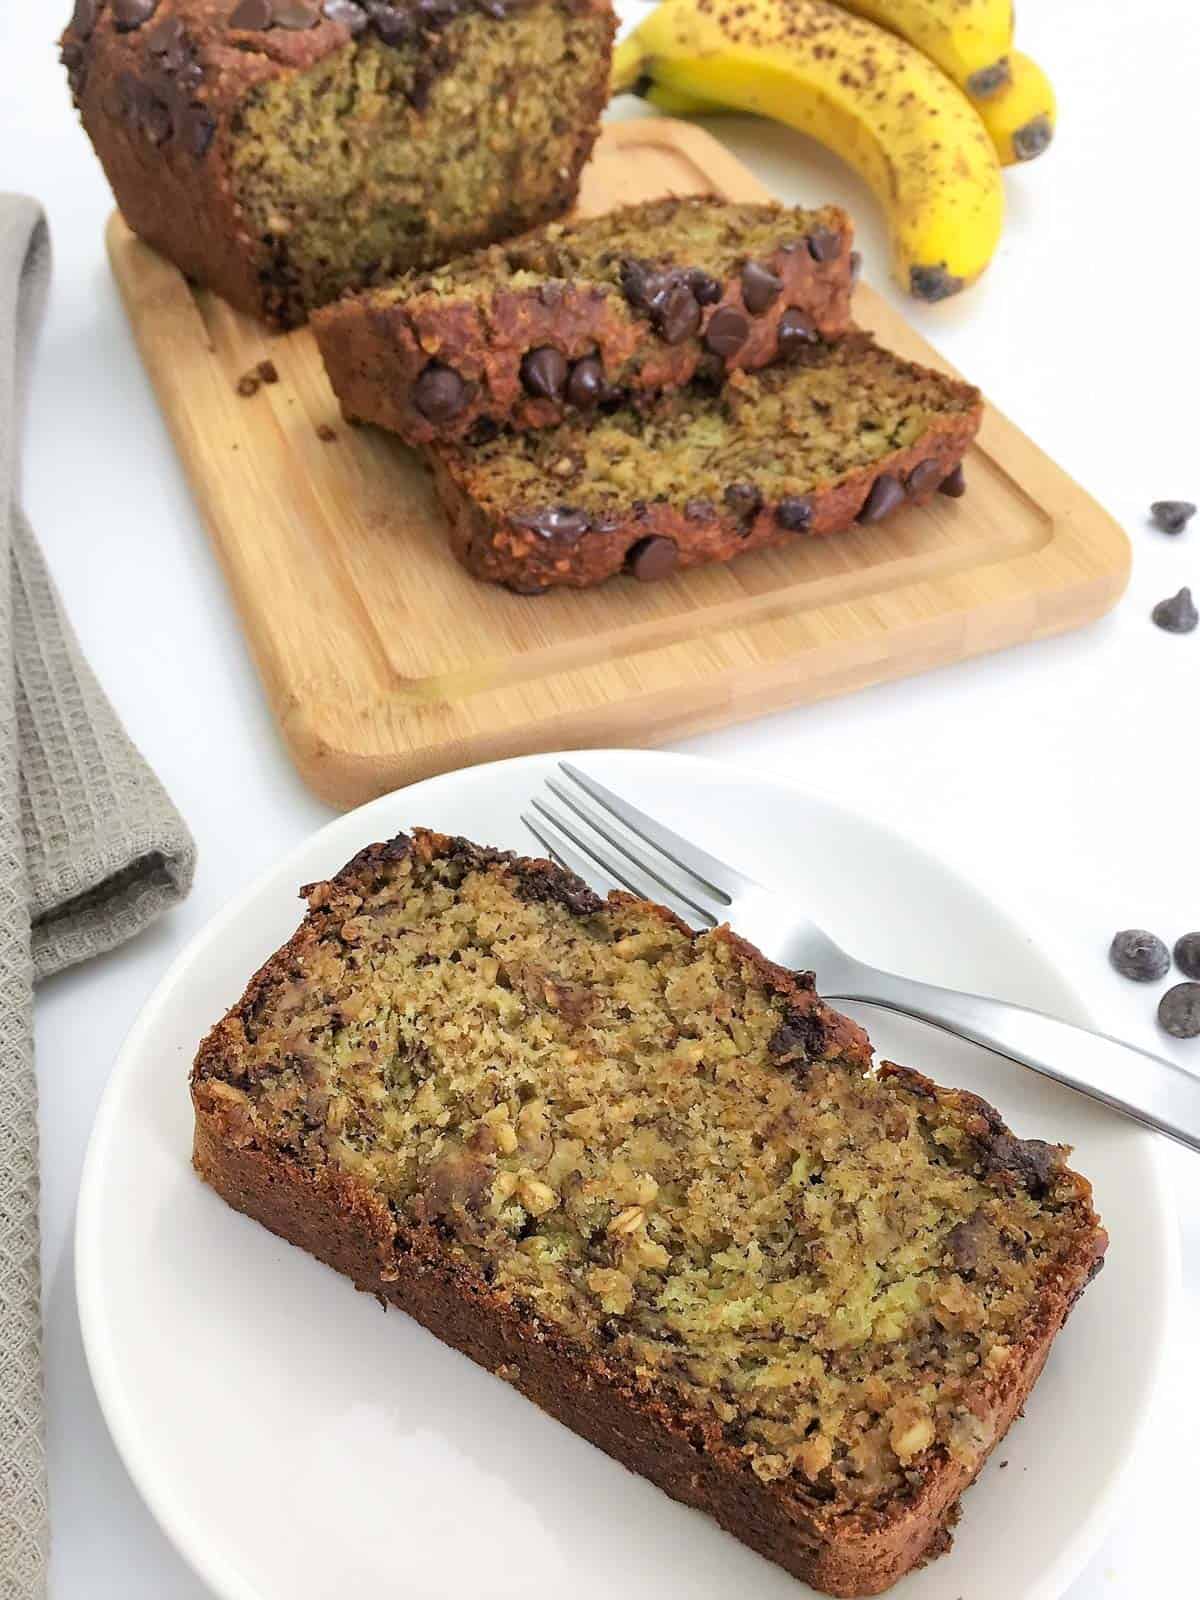 One slice of banana bread on plate with fork and loaf in background.